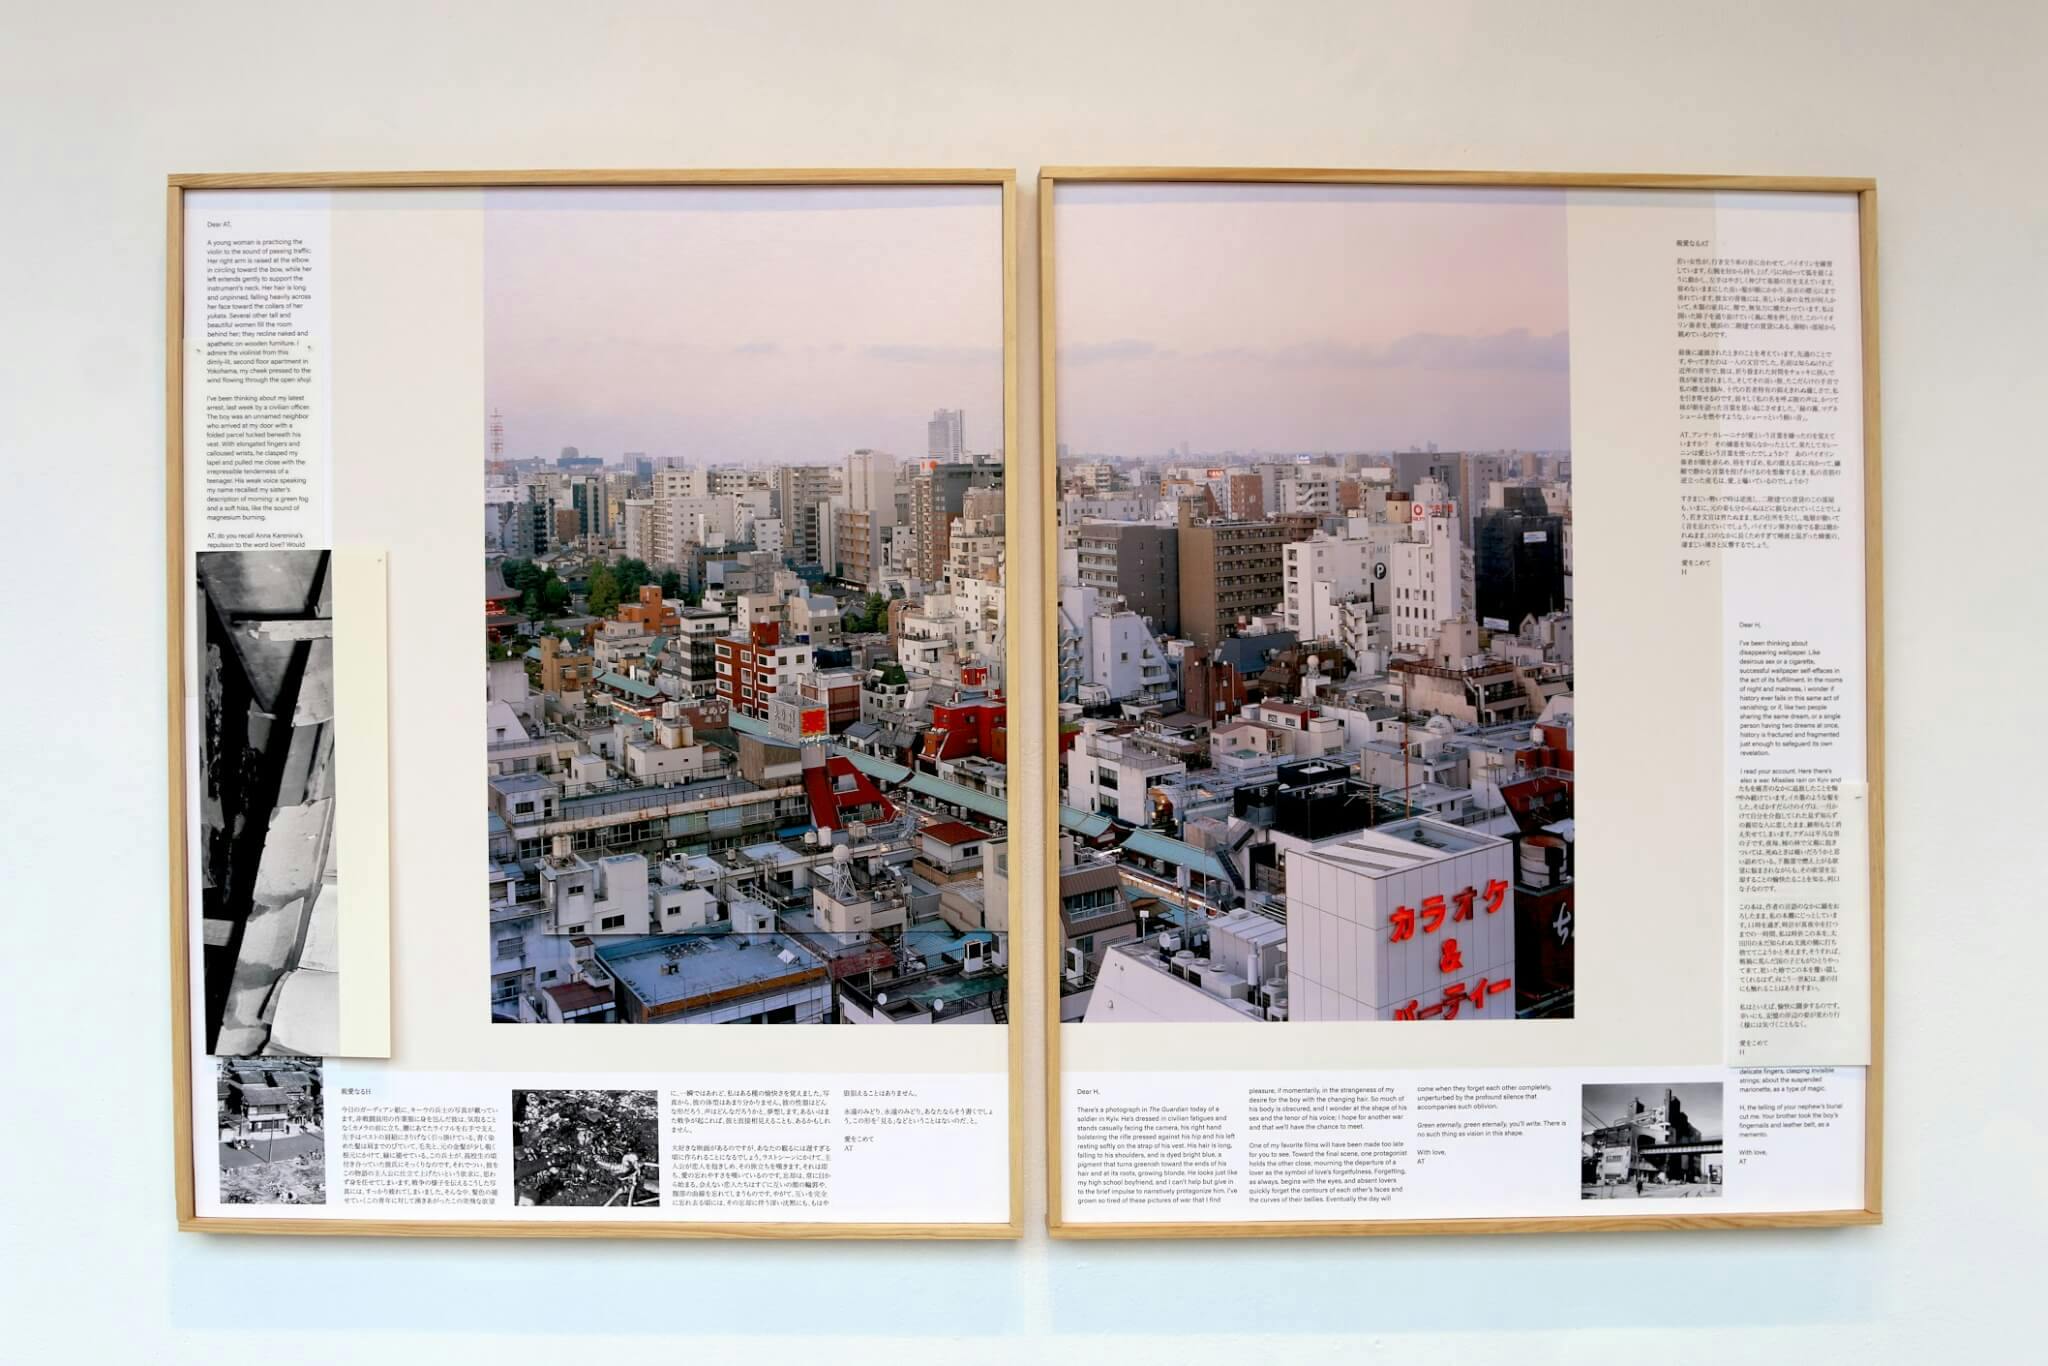 The image of a Japanese city is displayed in a work of art by Allie Tsubota.